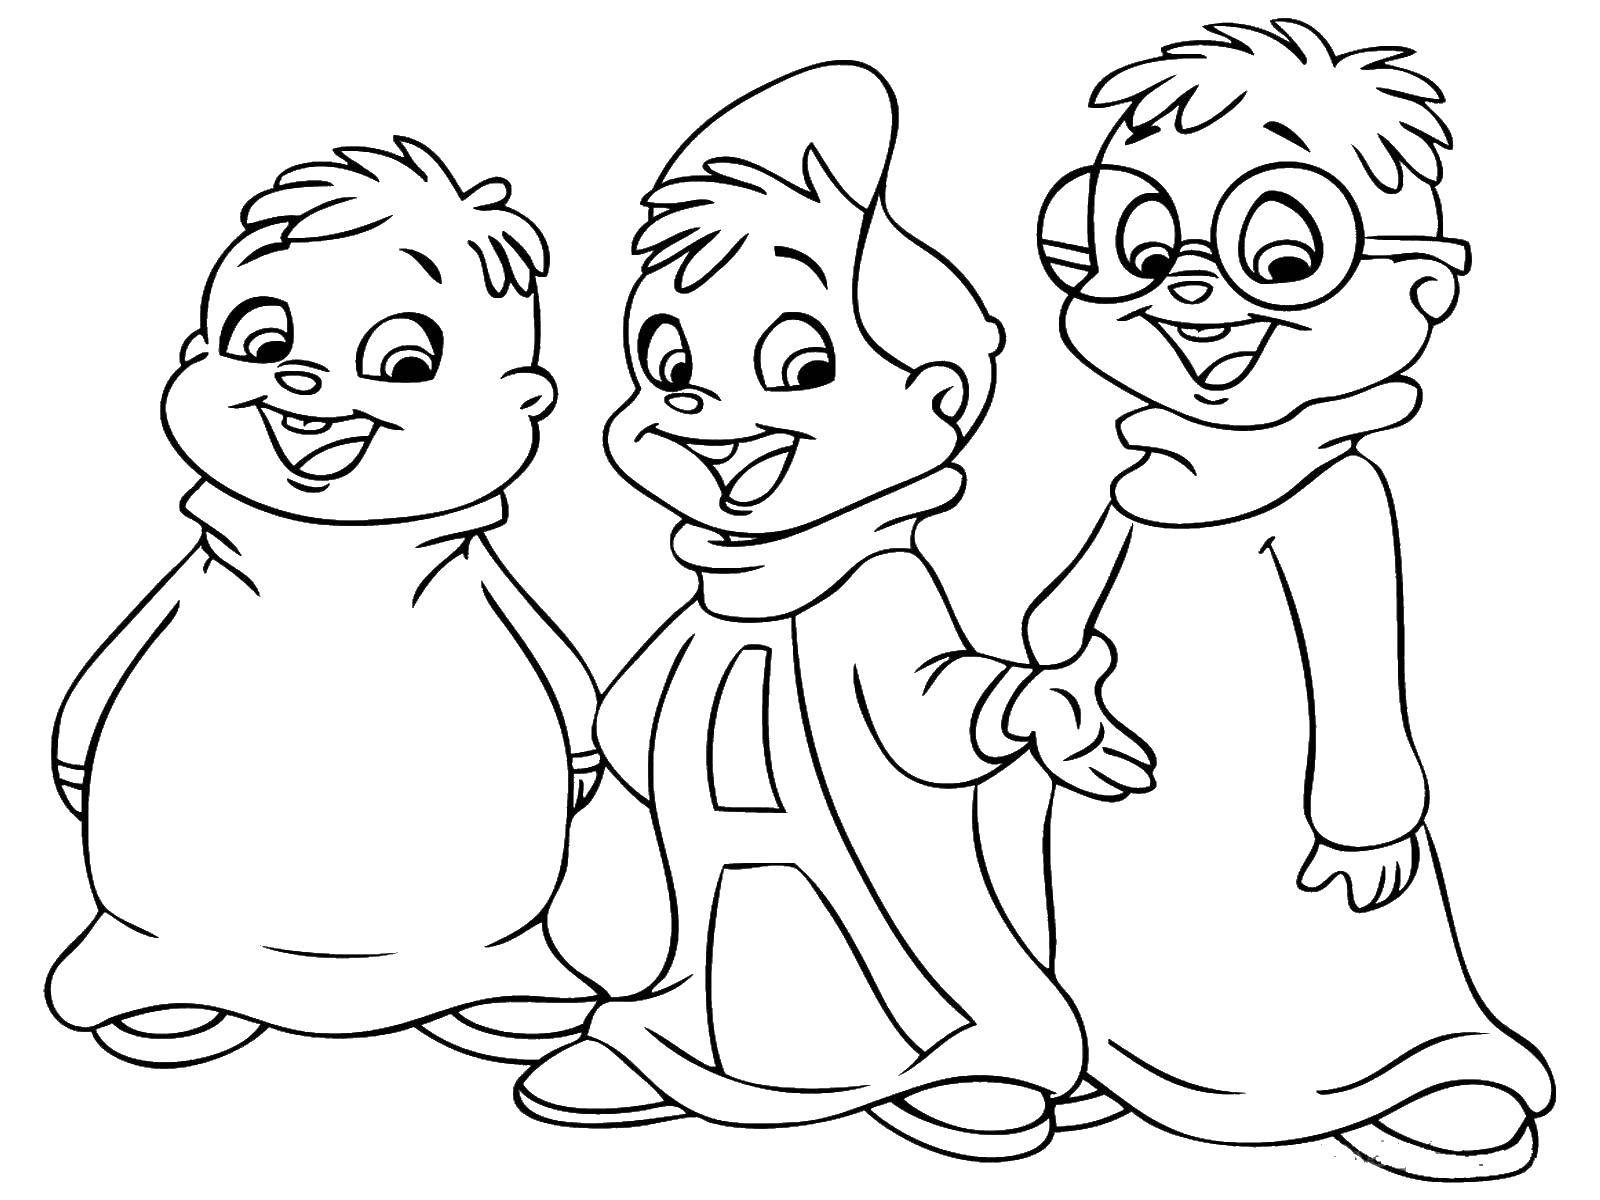 Coloring Kids. Category Coloring pages for kids. Tags:  kids, kids.